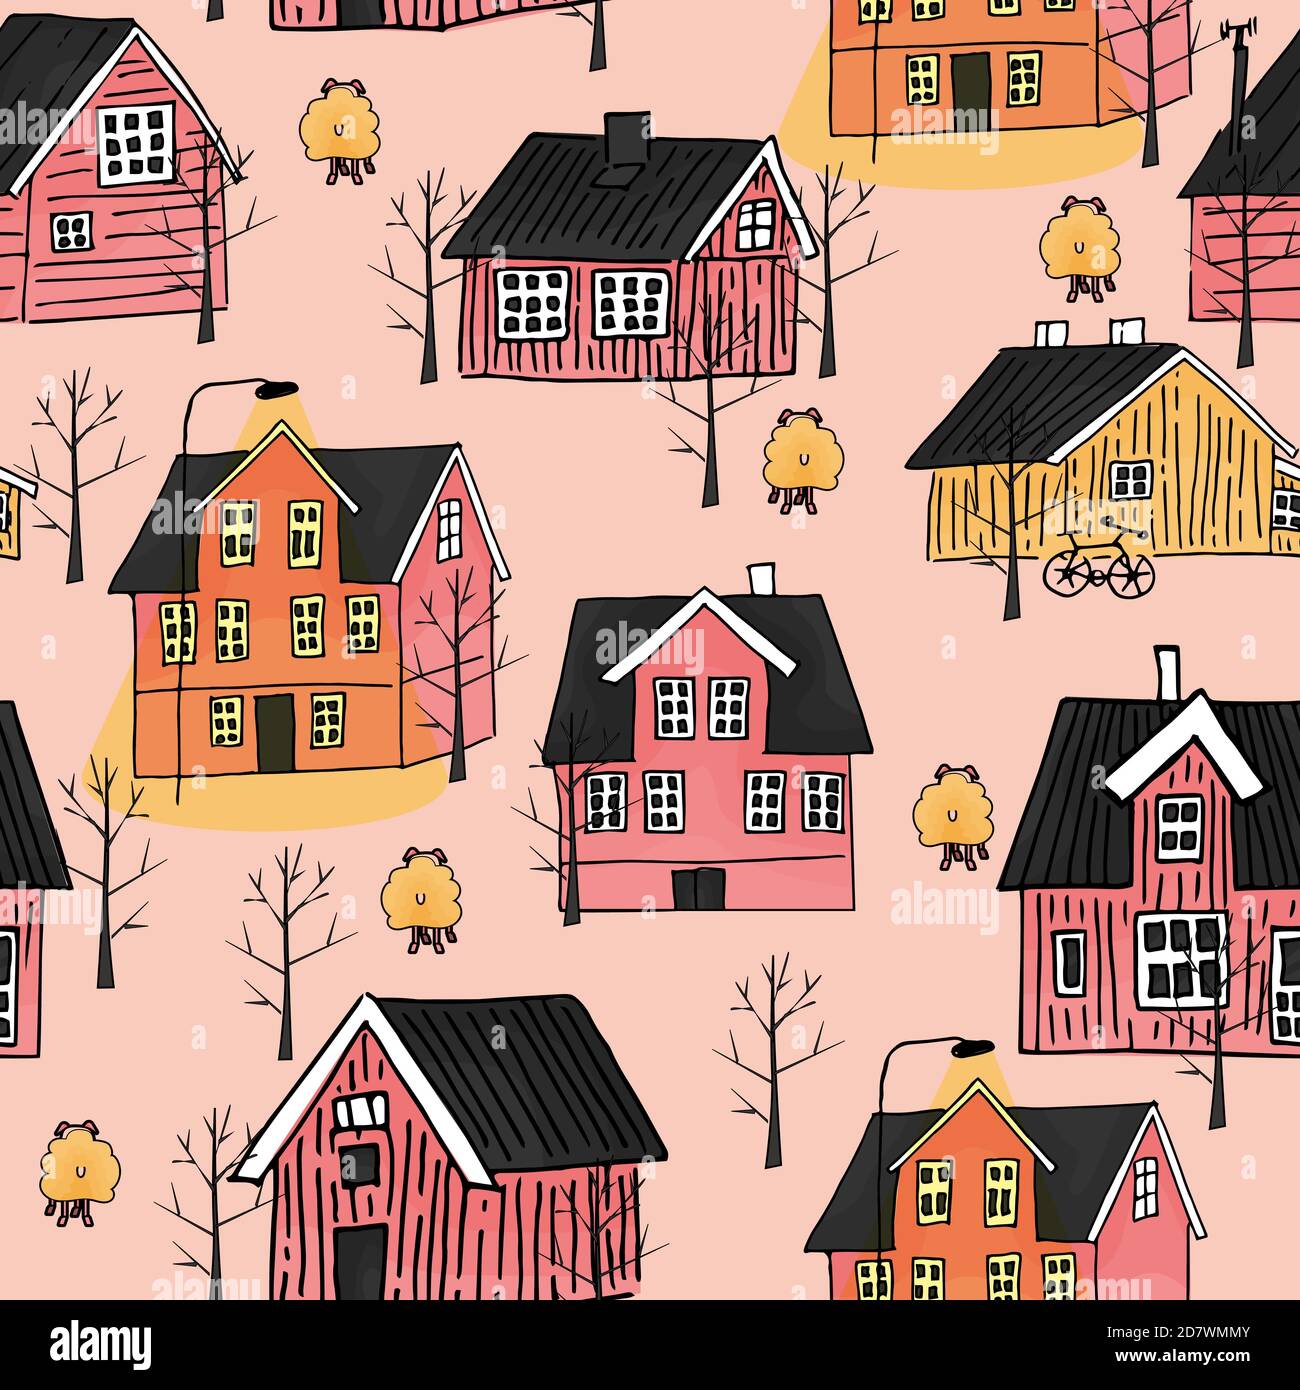 Yellow and pink scandinavian wooden houses with light on the street and trees without leaves seamless repeat pattern Stock Vector